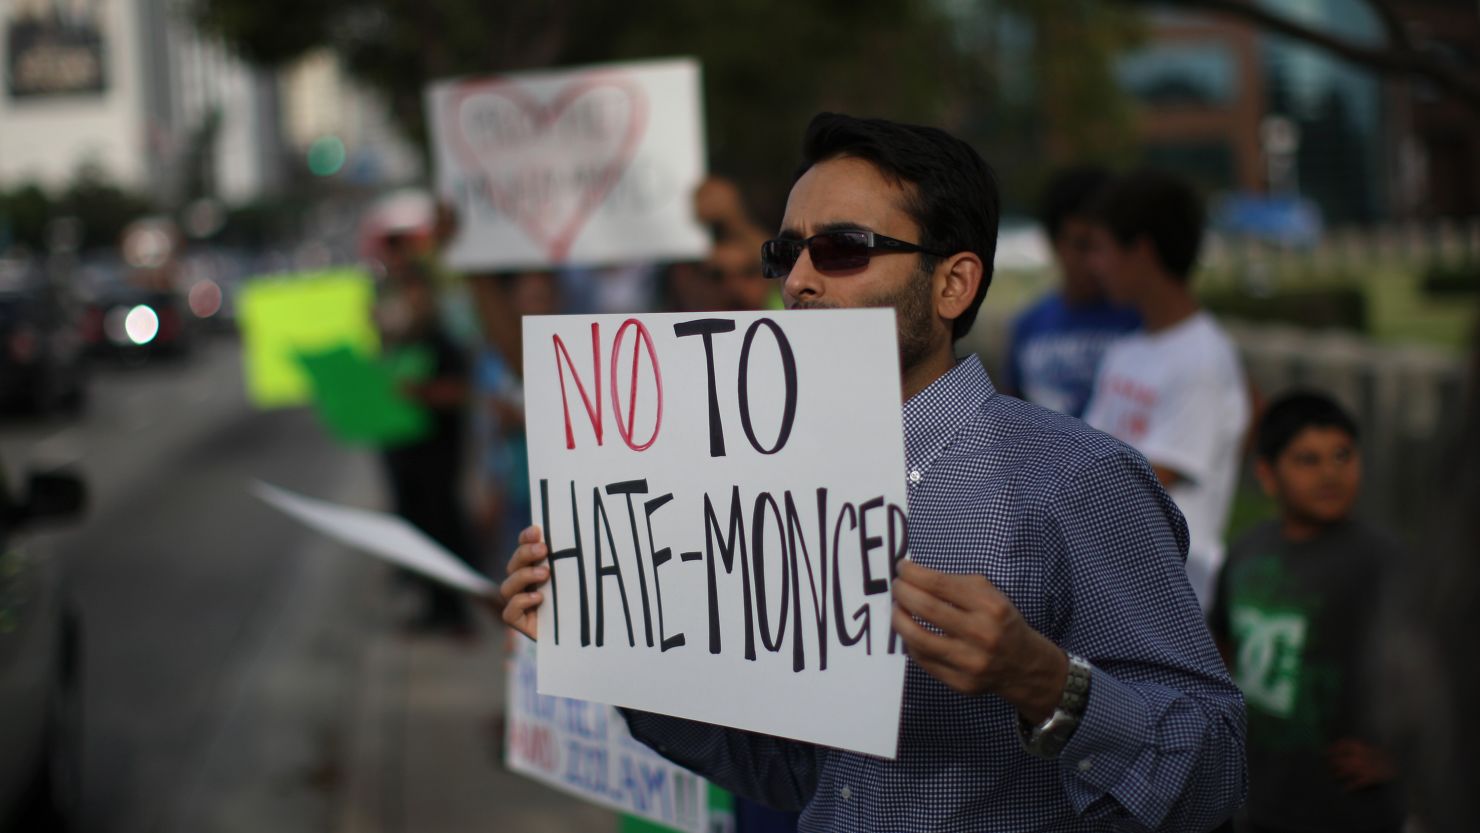 A member of the Muslim Congress protests hatred against Islam last week in Los Angeles.